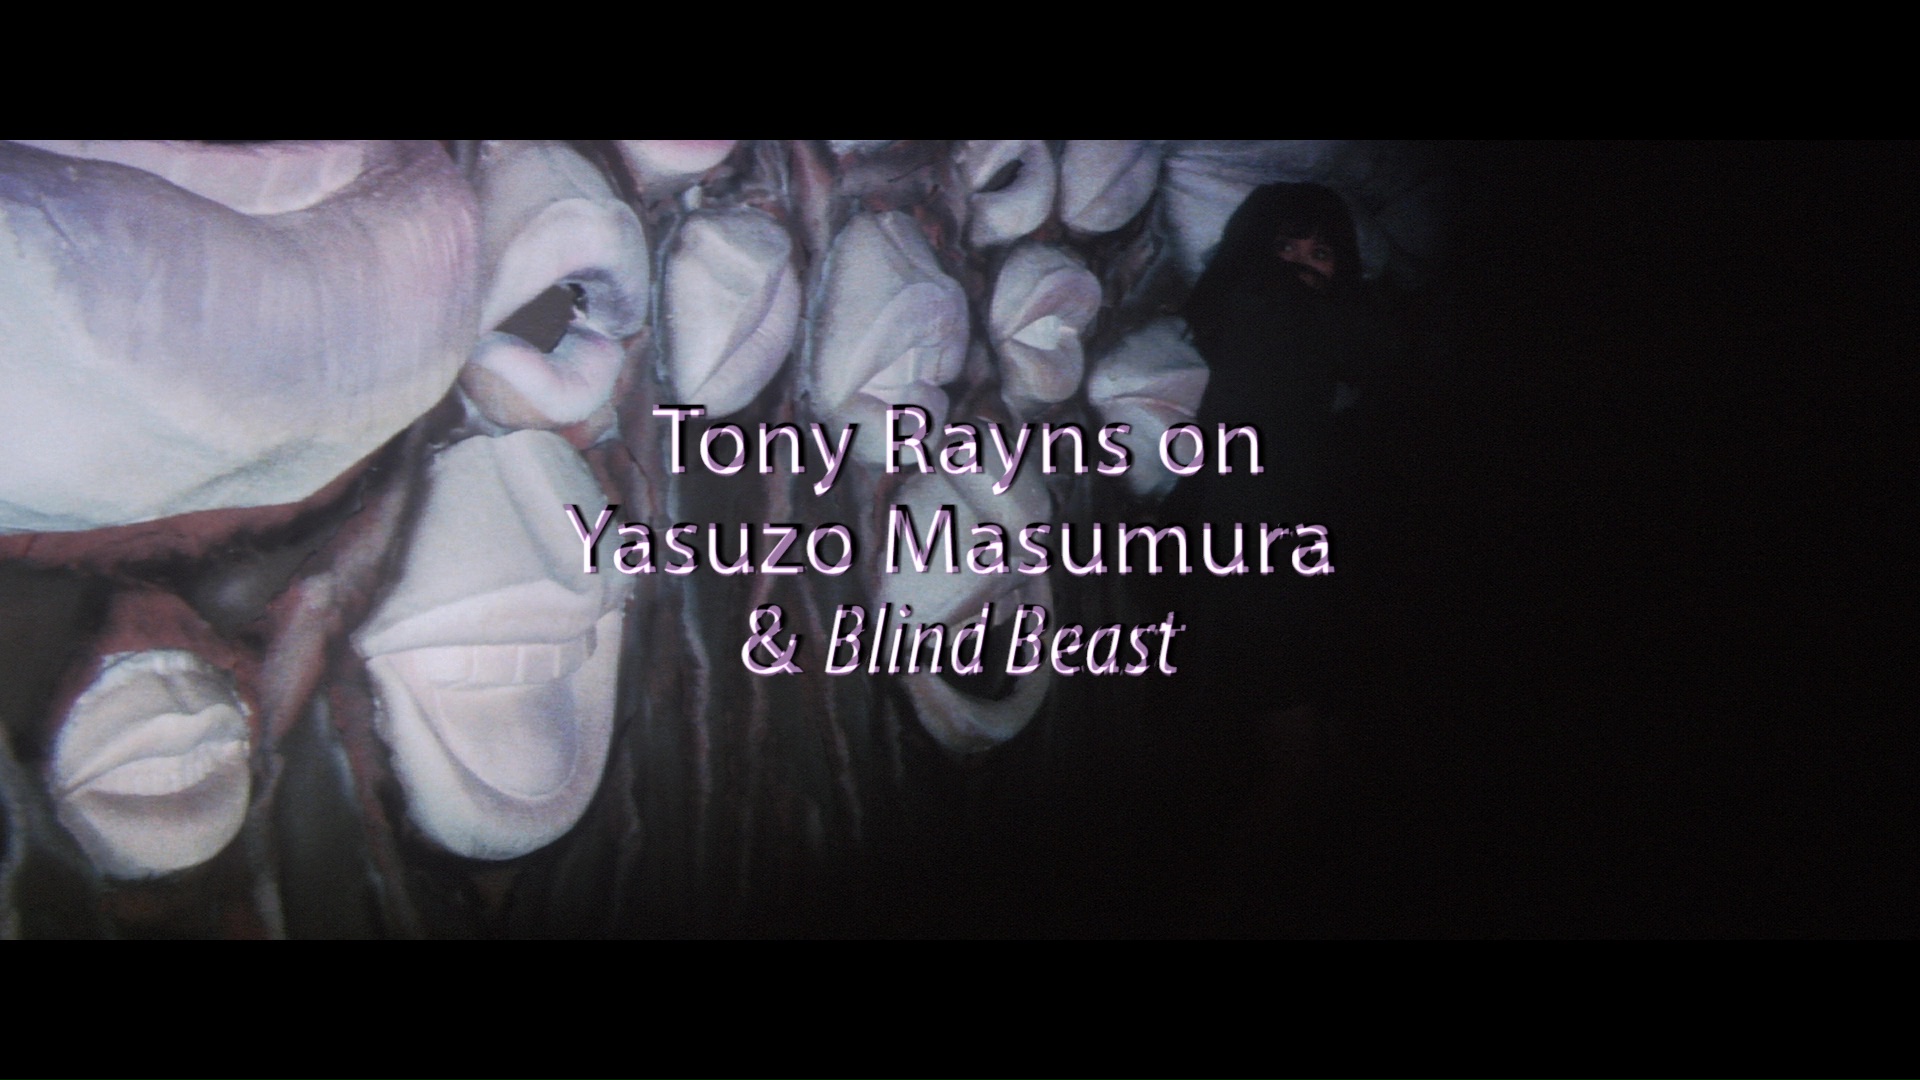 Blind Beast Tony Rayns interview